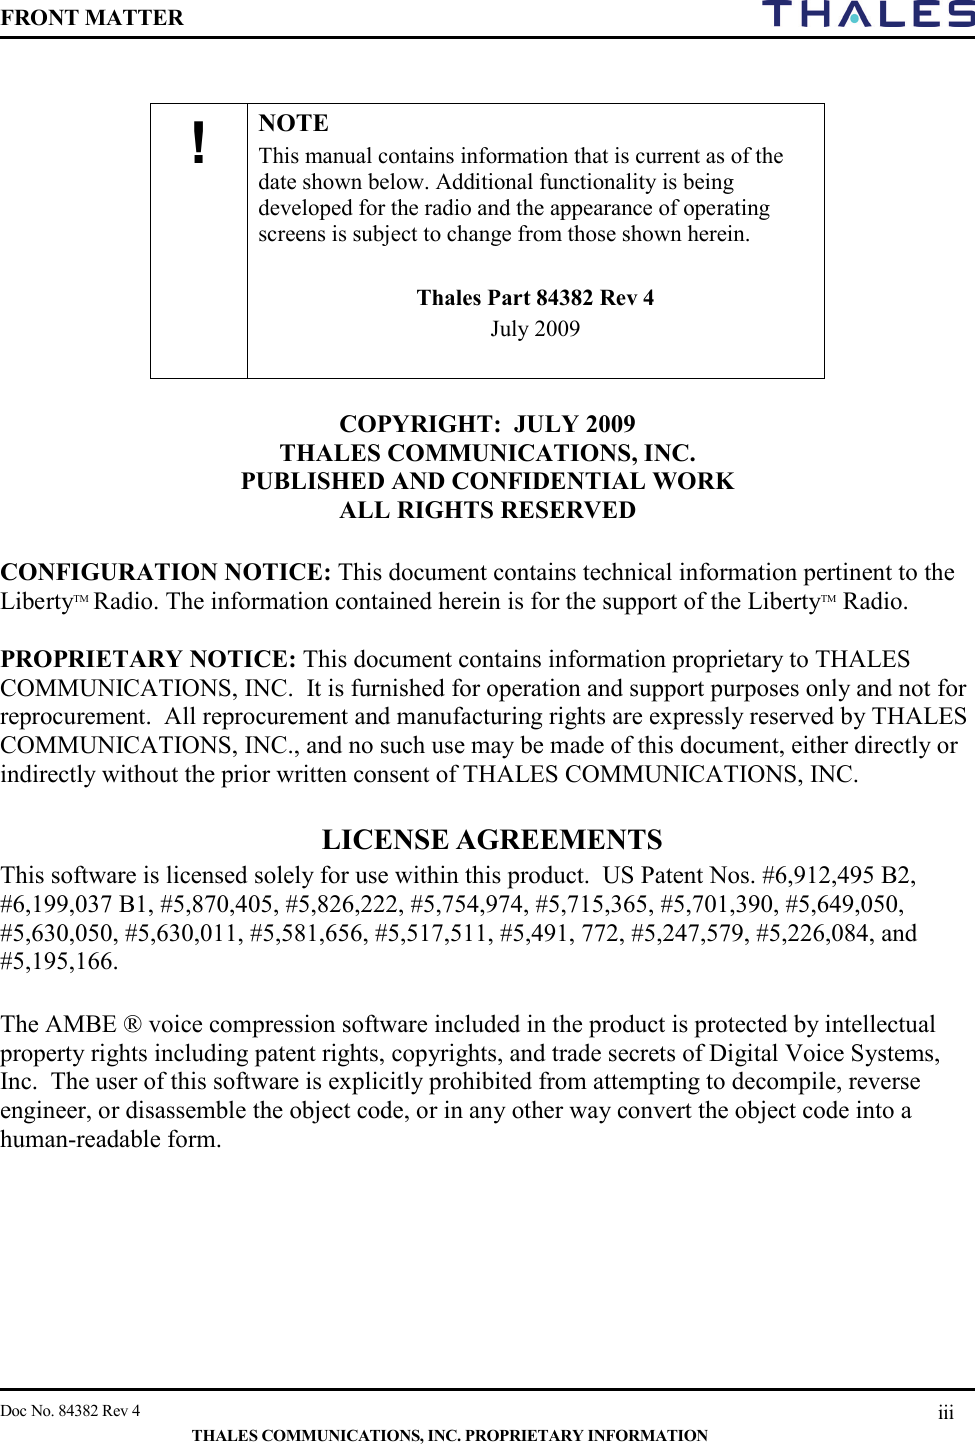 FRONT MATTER    Doc No. 84382 Rev 4    THALES COMMUNICATIONS, INC. PROPRIETARY INFORMATION iii             COPYRIGHT:  JULY 2009  THALES COMMUNICATIONS, INC.  PUBLISHED AND CONFIDENTIAL WORK  ALL RIGHTS RESERVED  CONFIGURATION NOTICE: This document contains technical information pertinent to the LibertyTM Radio. The information contained herein is for the support of the LibertyTM Radio.  PROPRIETARY NOTICE: This document contains information proprietary to THALES COMMUNICATIONS, INC.  It is furnished for operation and support purposes only and not for reprocurement.  All reprocurement and manufacturing rights are expressly reserved by THALES COMMUNICATIONS, INC., and no such use may be made of this document, either directly or indirectly without the prior written consent of THALES COMMUNICATIONS, INC.  LICENSE AGREEMENTS  This software is licensed solely for use within this product.  US Patent Nos. #6,912,495 B2,  #6,199,037 B1, #5,870,405, #5,826,222, #5,754,974, #5,715,365, #5,701,390, #5,649,050, #5,630,050, #5,630,011, #5,581,656, #5,517,511, #5,491, 772, #5,247,579, #5,226,084, and #5,195,166.  The AMBE ® voice compression software included in the product is protected by intellectual property rights including patent rights, copyrights, and trade secrets of Digital Voice Systems, Inc.  The user of this software is explicitly prohibited from attempting to decompile, reverse engineer, or disassemble the object code, or in any other way convert the object code into a human-readable form.      !  NOTE This manual contains information that is current as of the date shown below. Additional functionality is being developed for the radio and the appearance of operating screens is subject to change from those shown herein.   Thales Part 84382 Rev 4 July 2009  